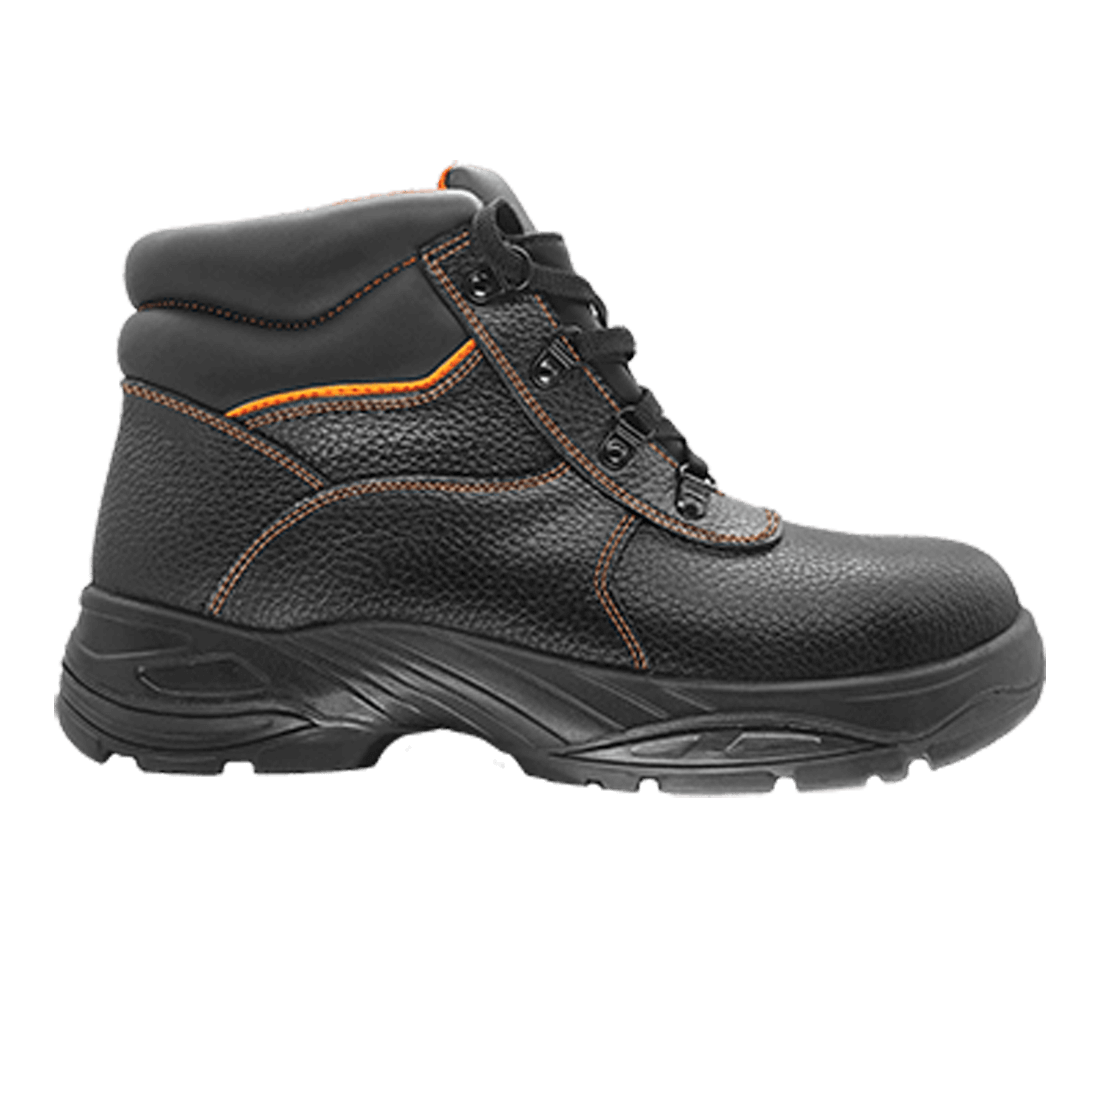 OVERCAP | BSF NEW SHOE Sir Safety System FAST